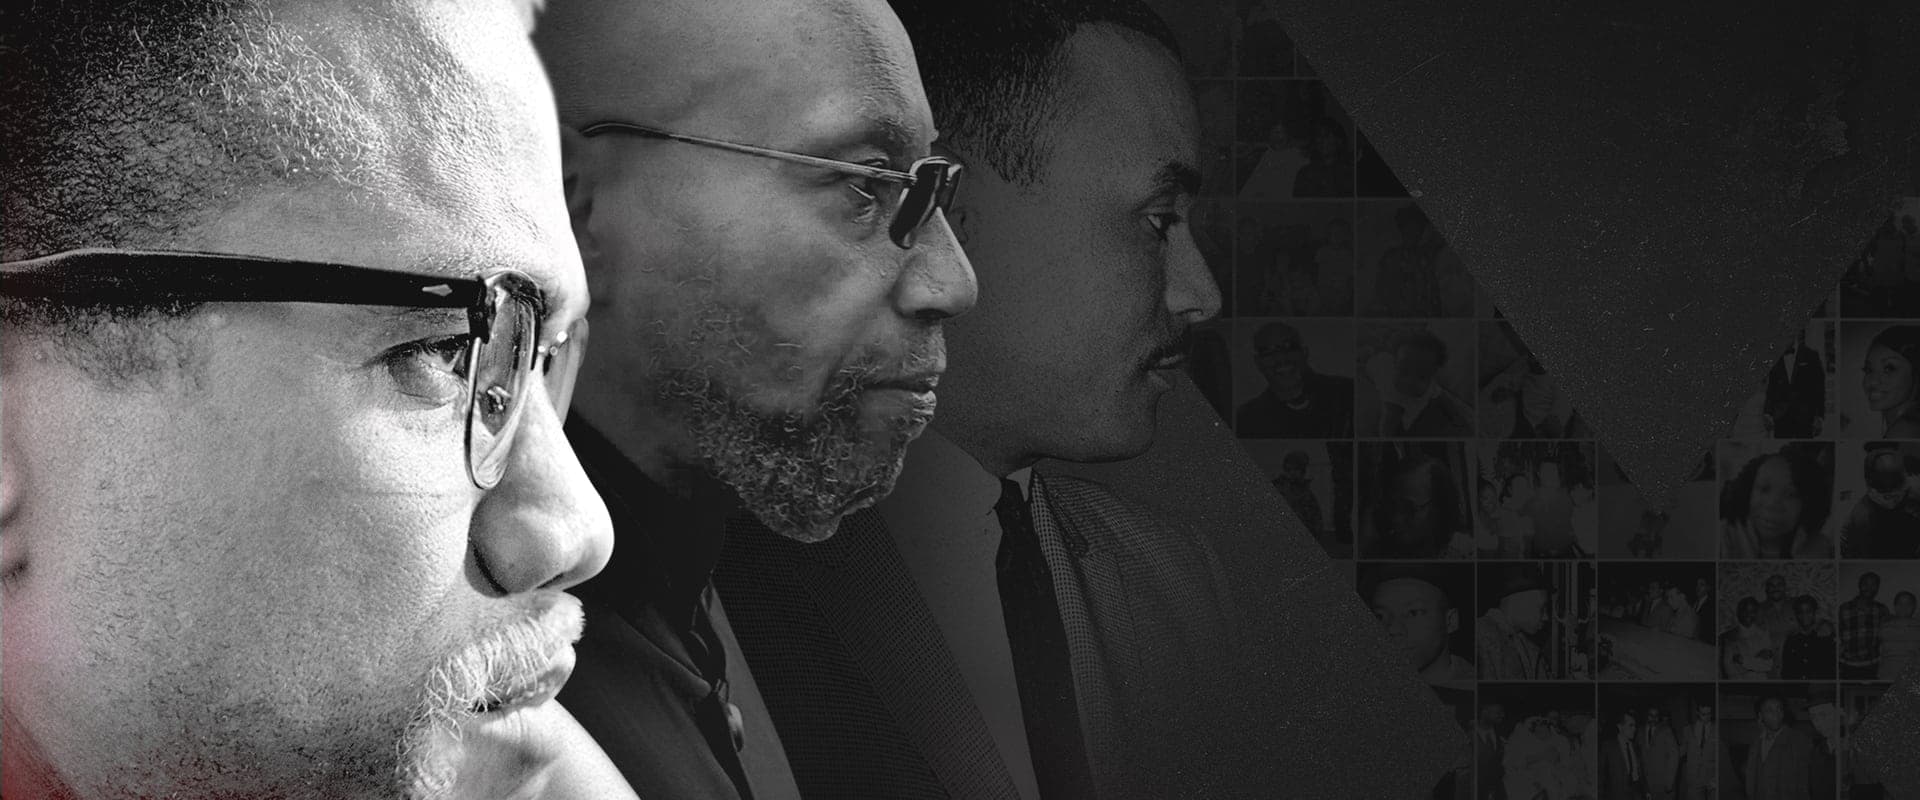 Soul of a Nation Presents: X / o n e r a t e d – The Murder of Malcolm X and 55 Years to Justice